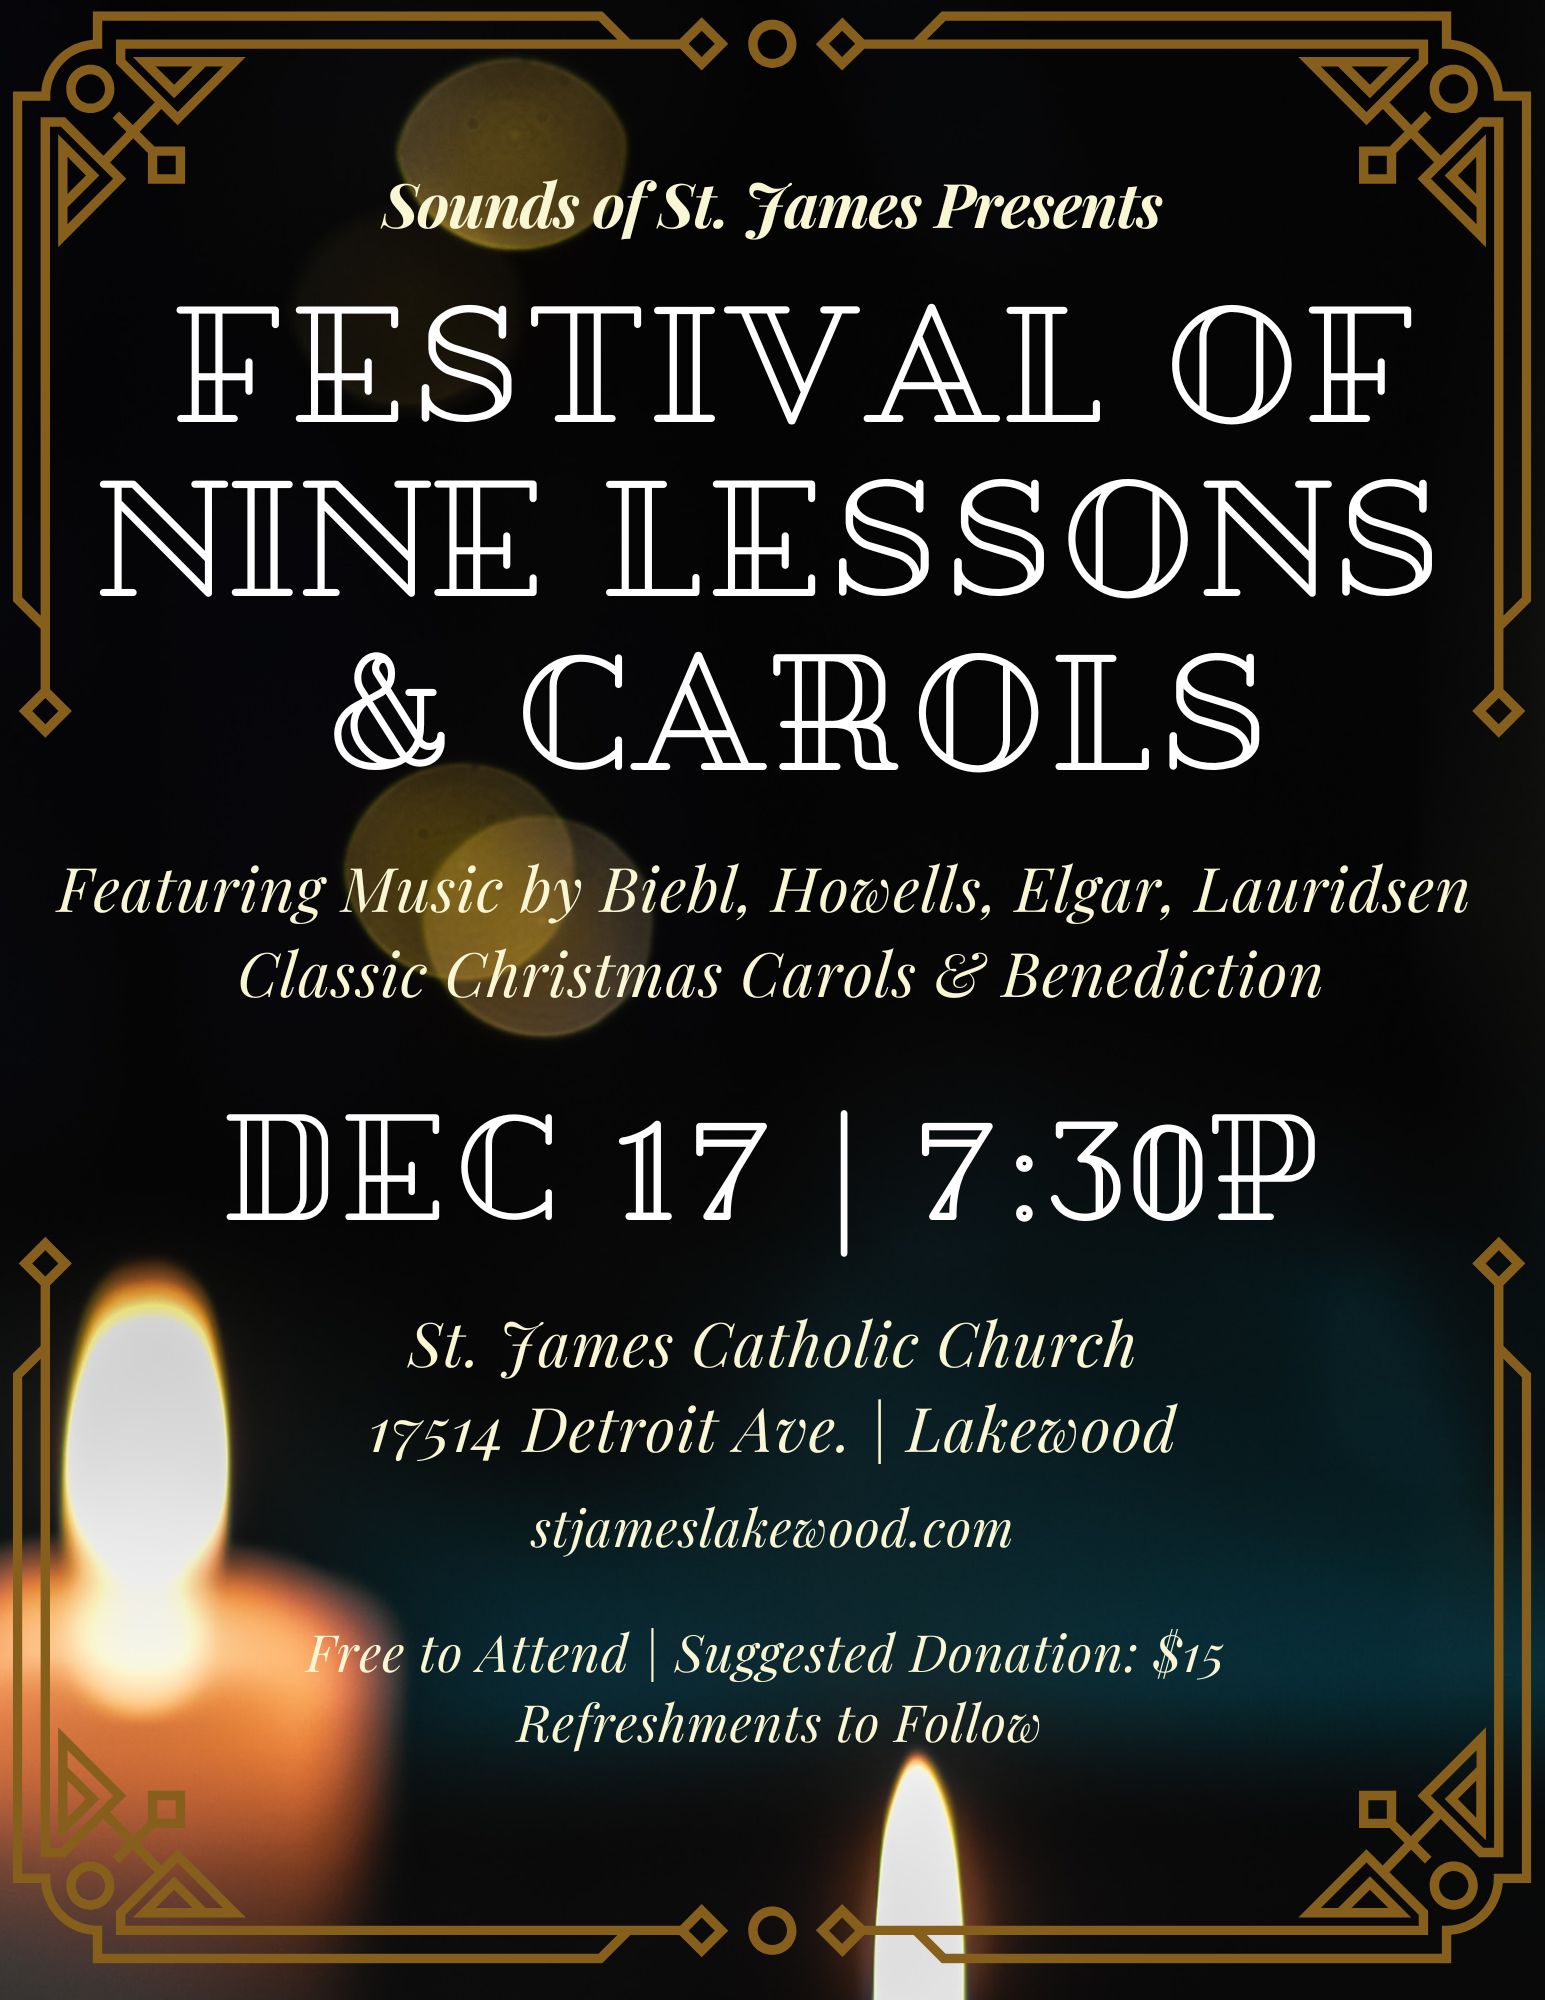 The Festival of Nine Lessons and Carols, St. James Church at St. James